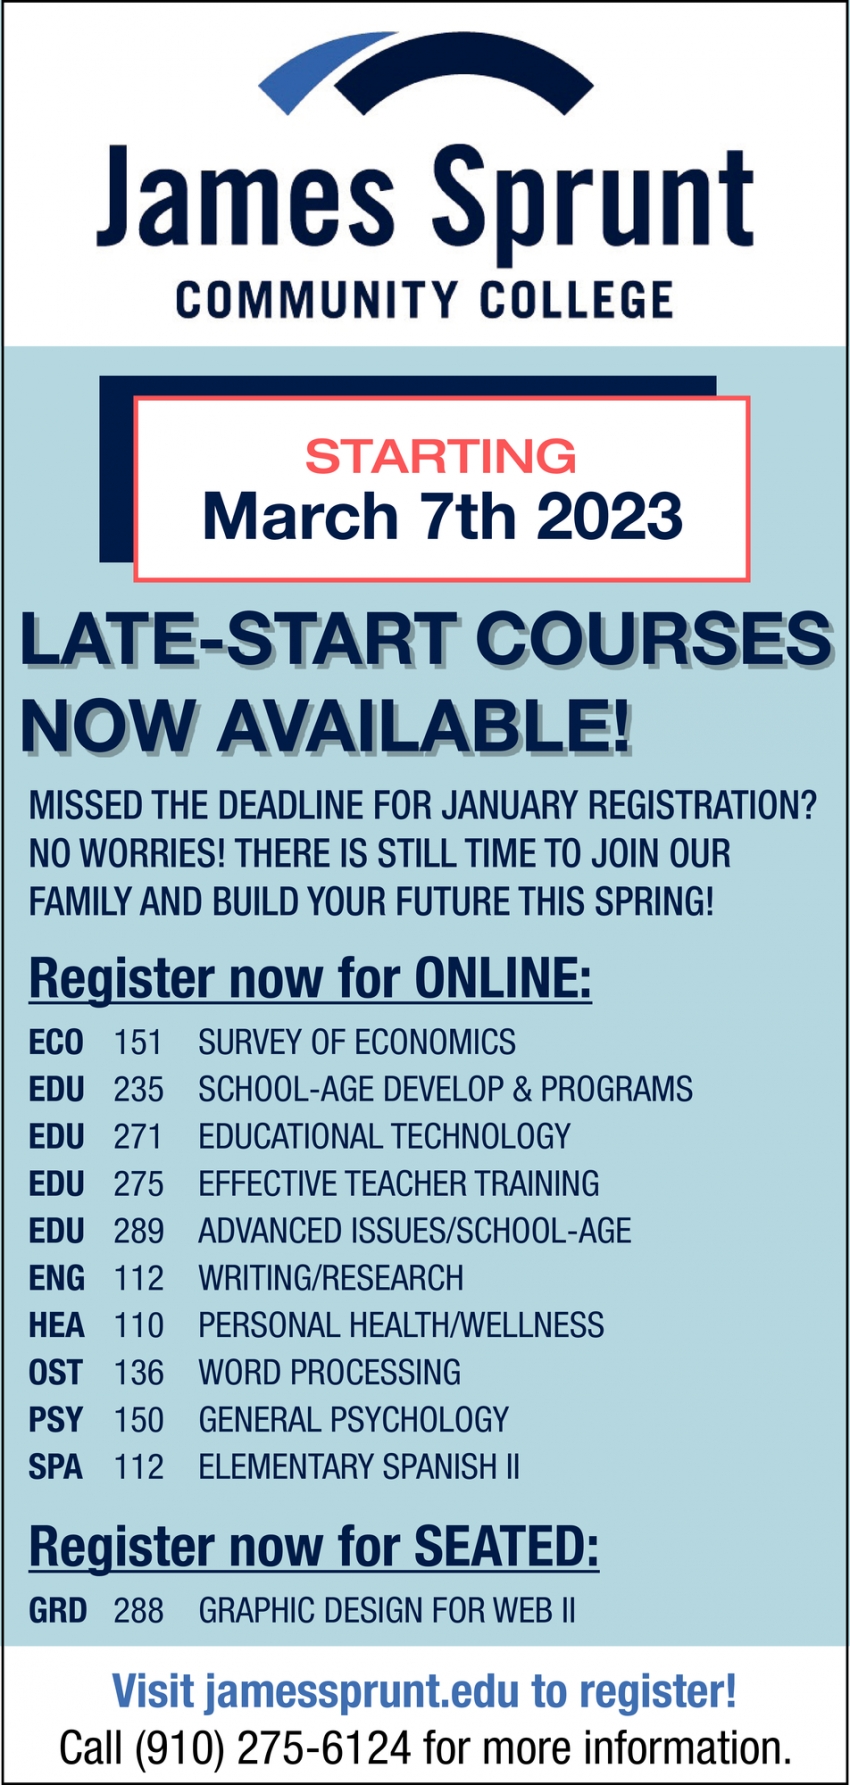 Late-Start Courses Now Available